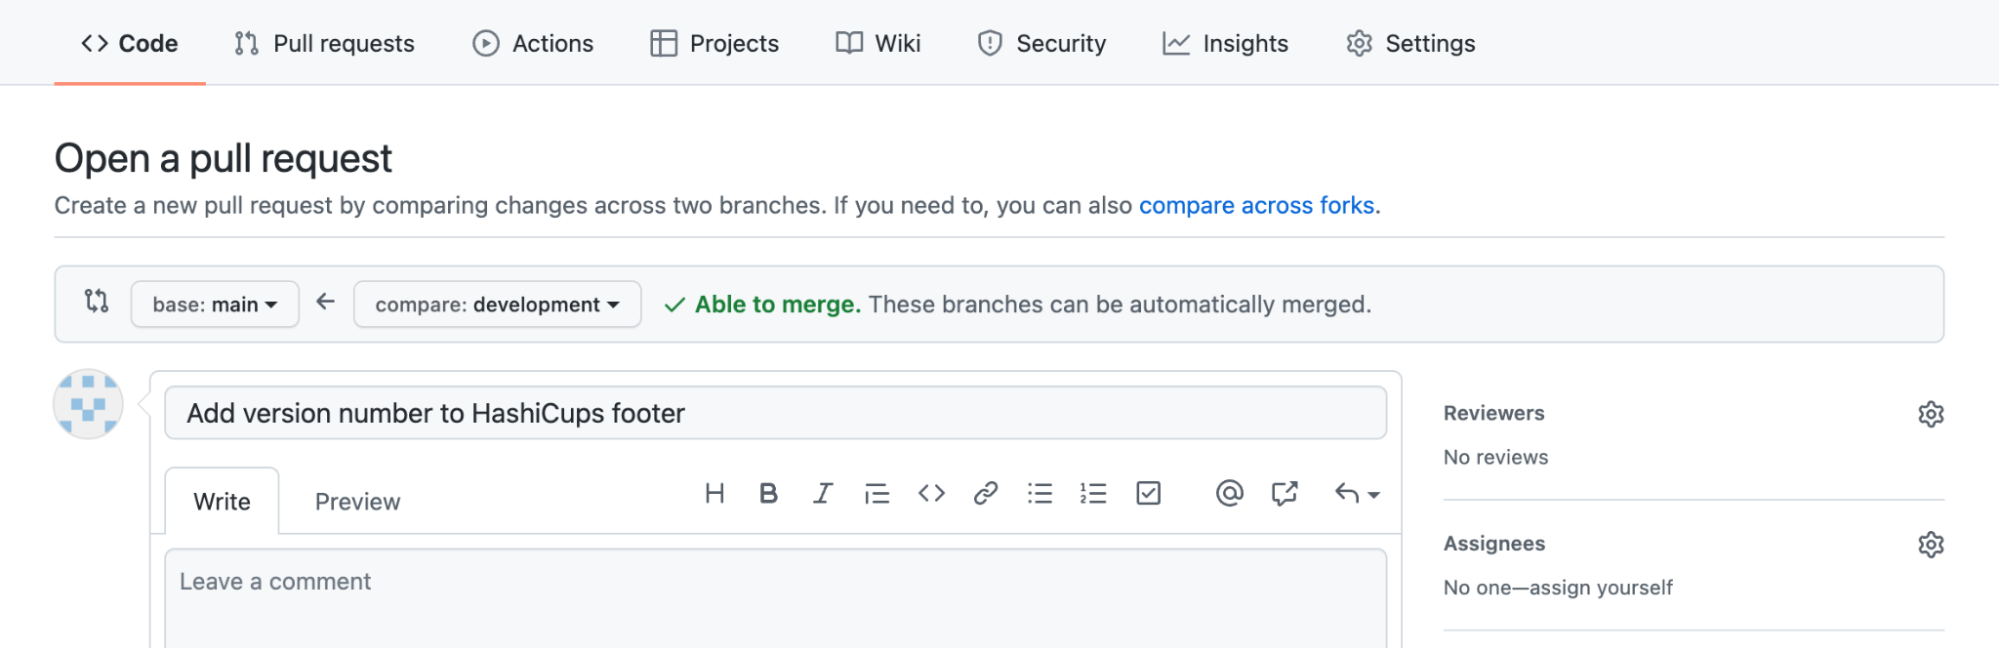 Create pull request from development to main branch on forked branch